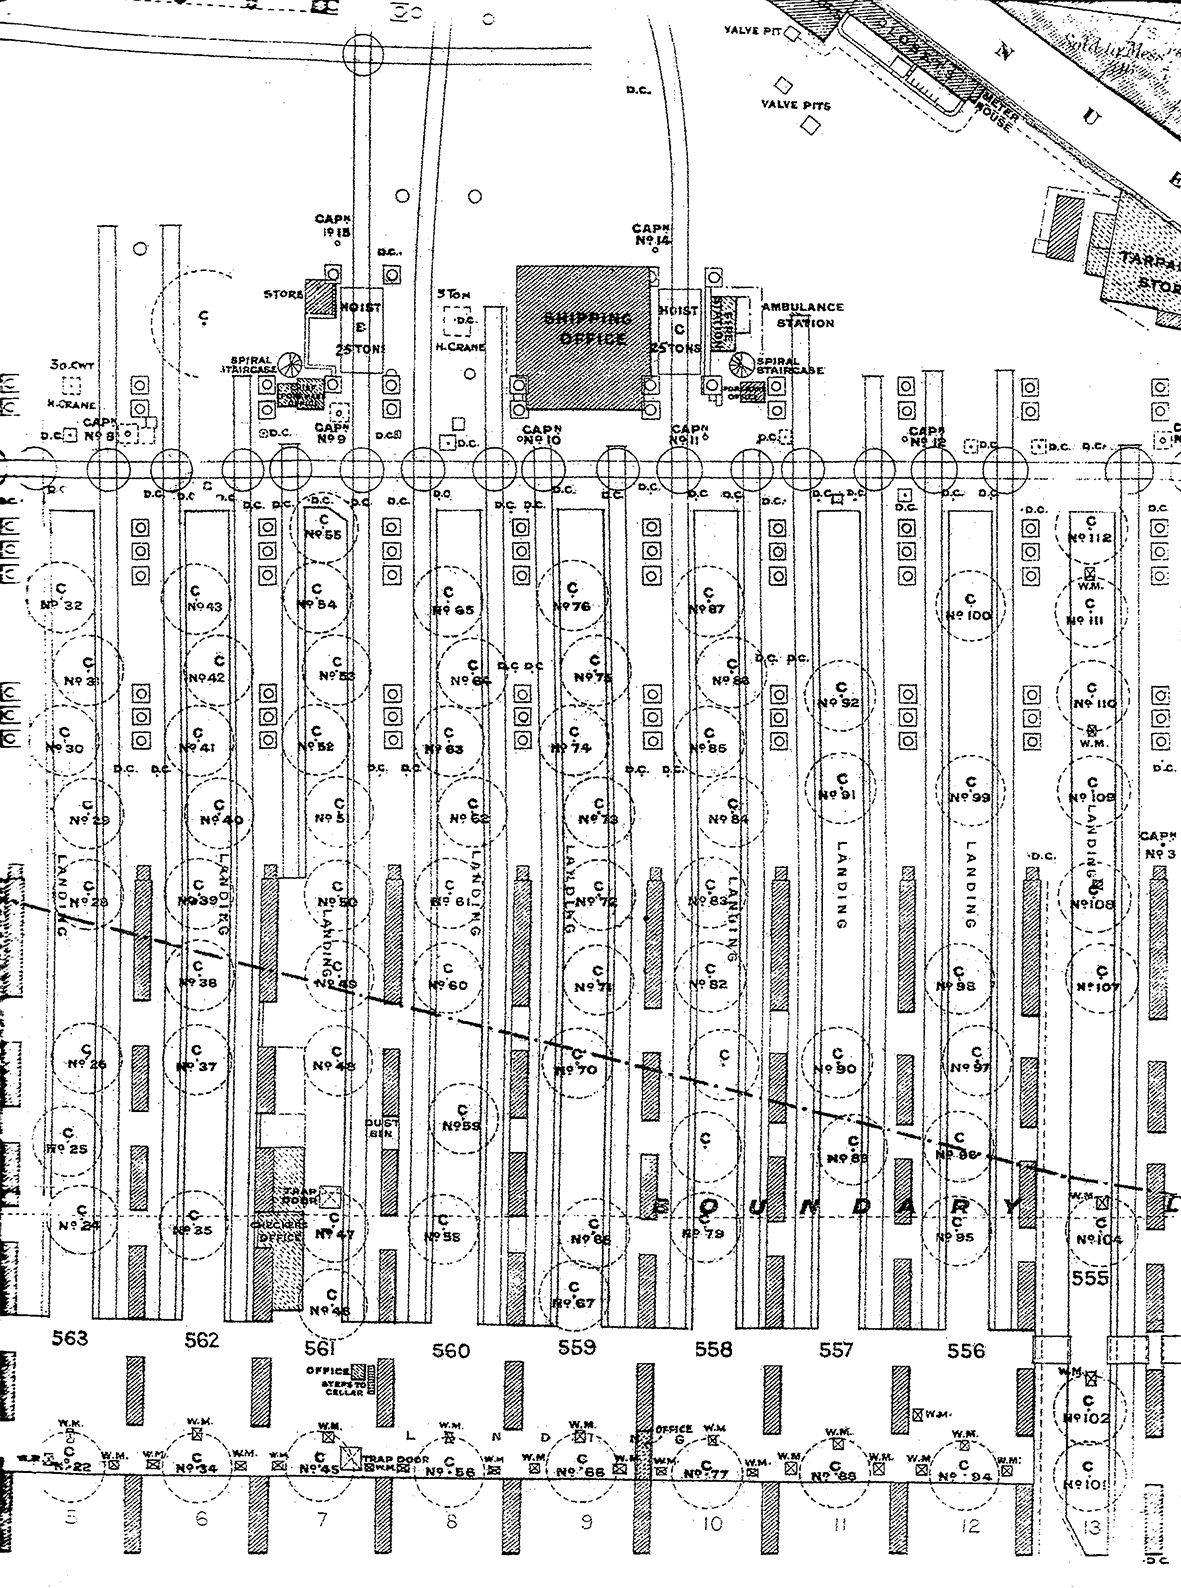 An extract from the LNWR 40-foot survey of 1921 showing the sidings, landing and cranes etc. within the under-croft of Broad Street station.